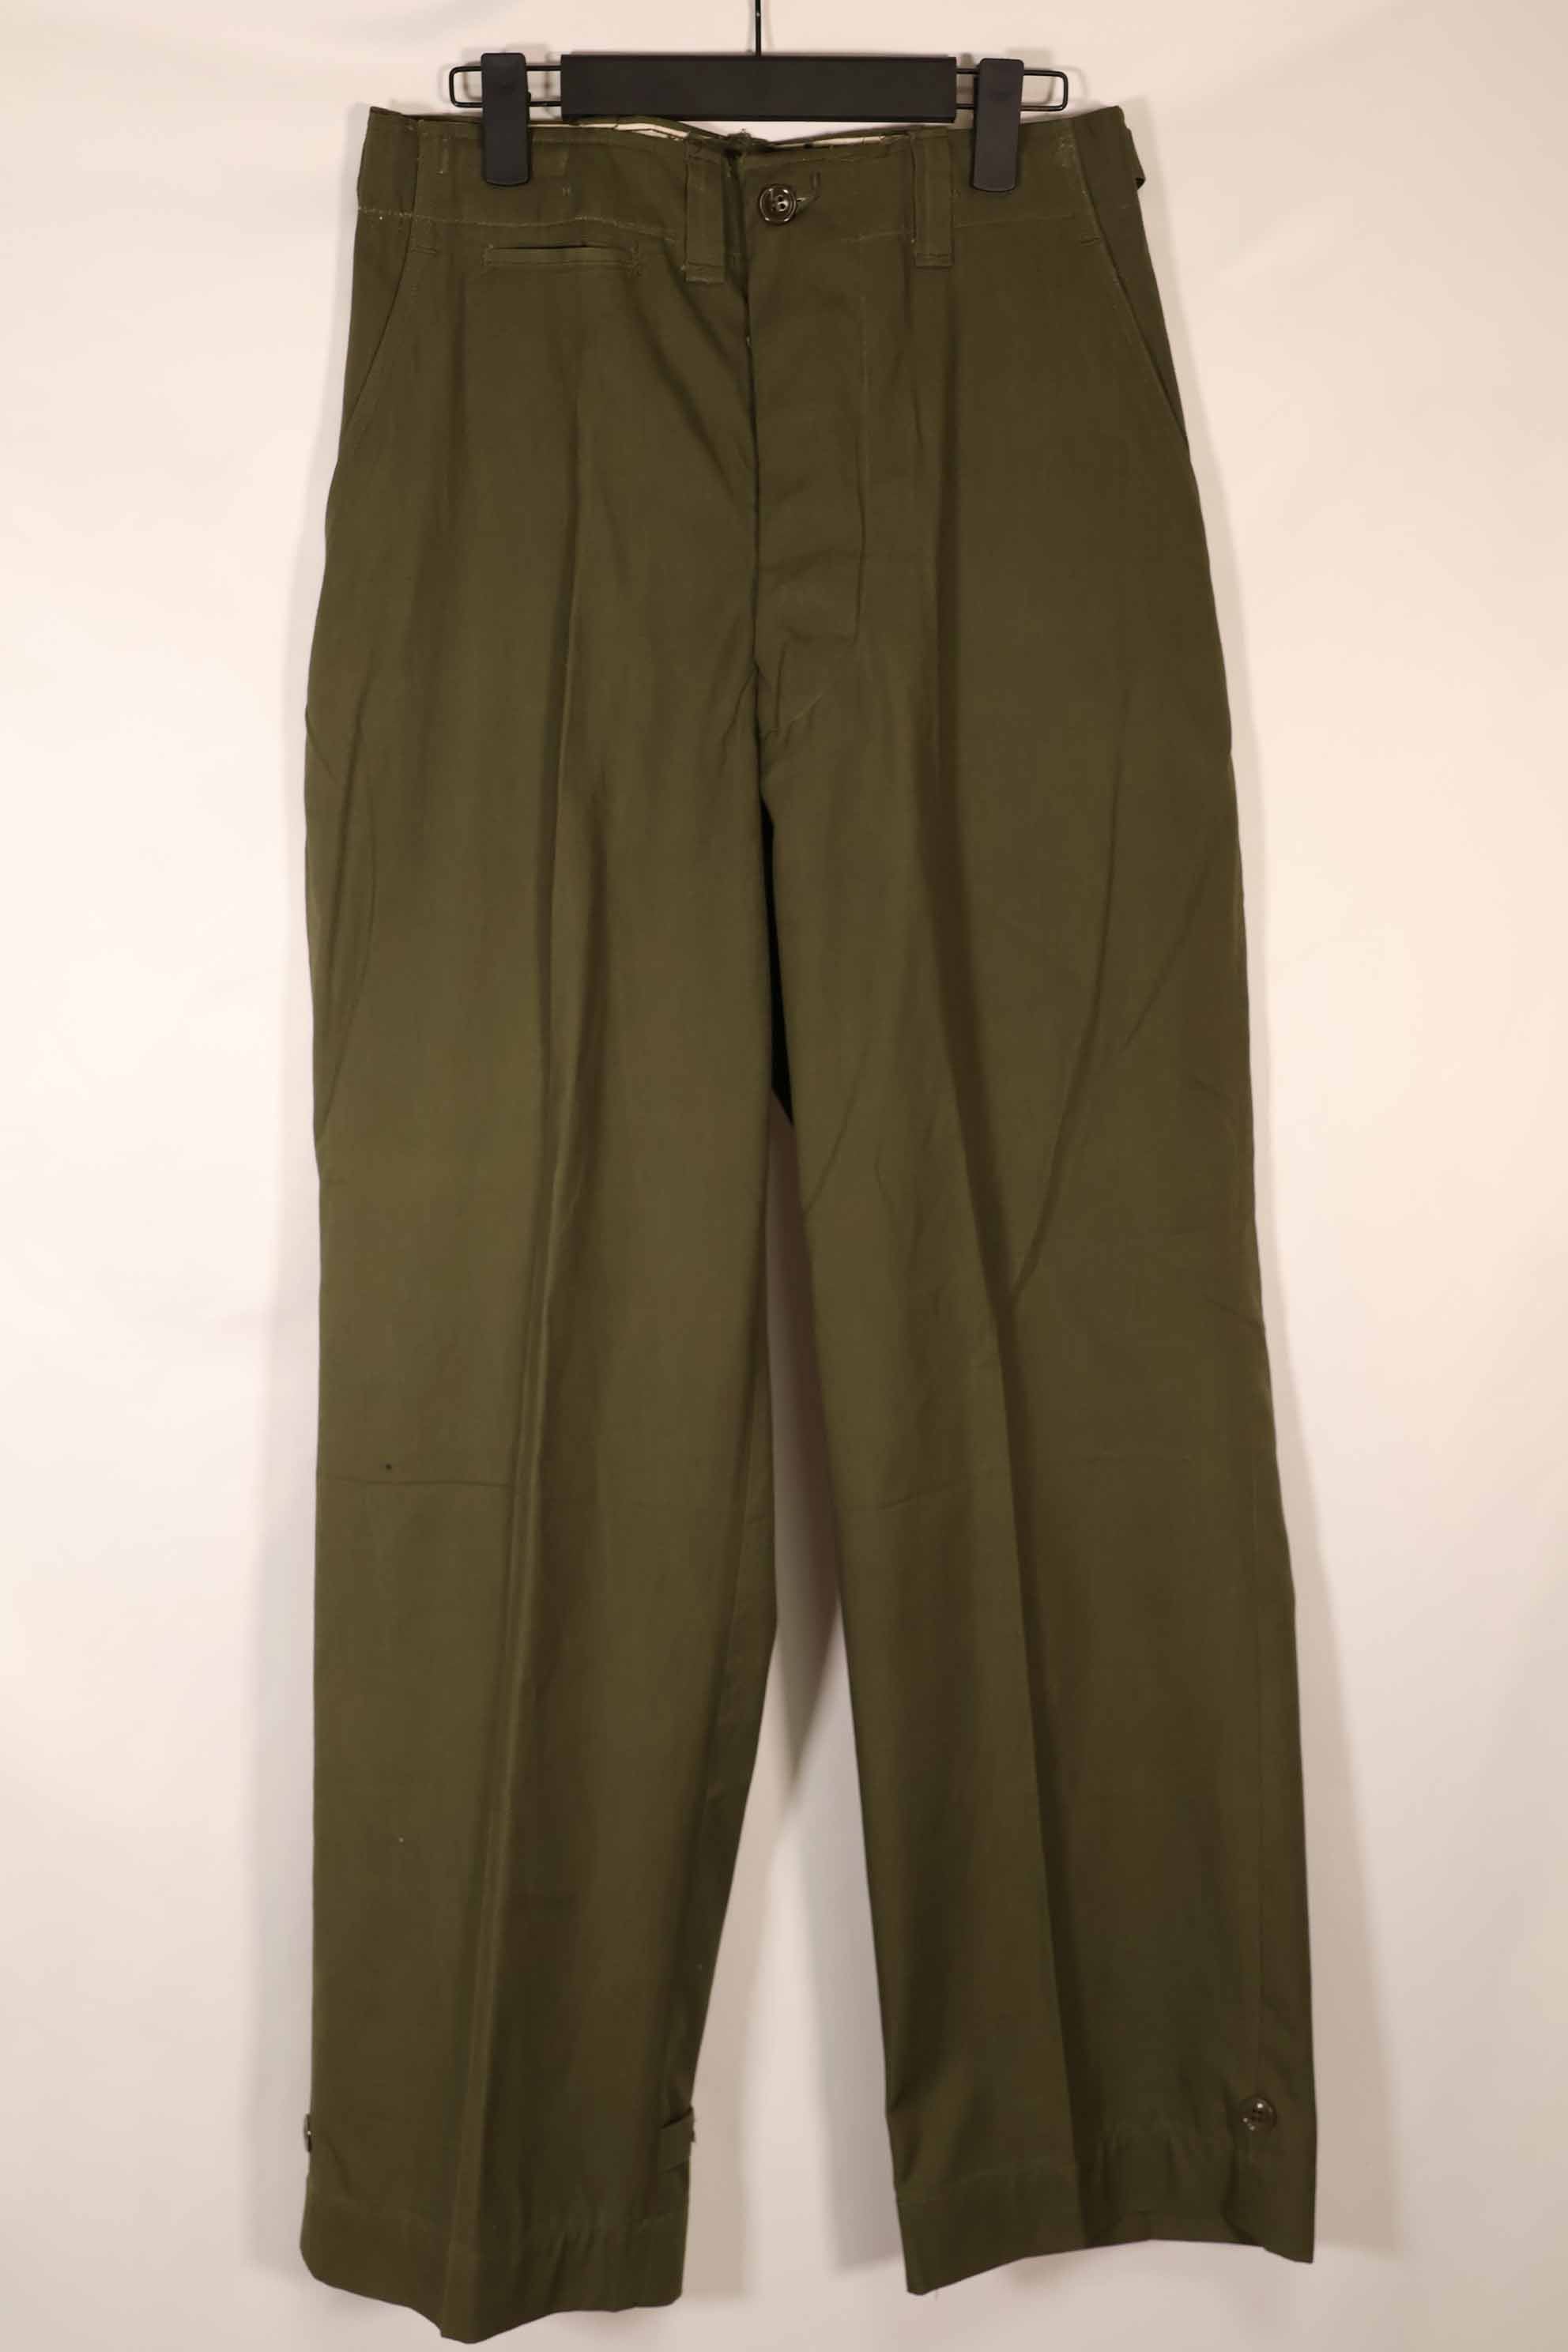 Real late 1940s - early 1950s M45 OD cotton field pants, almost unused, used.